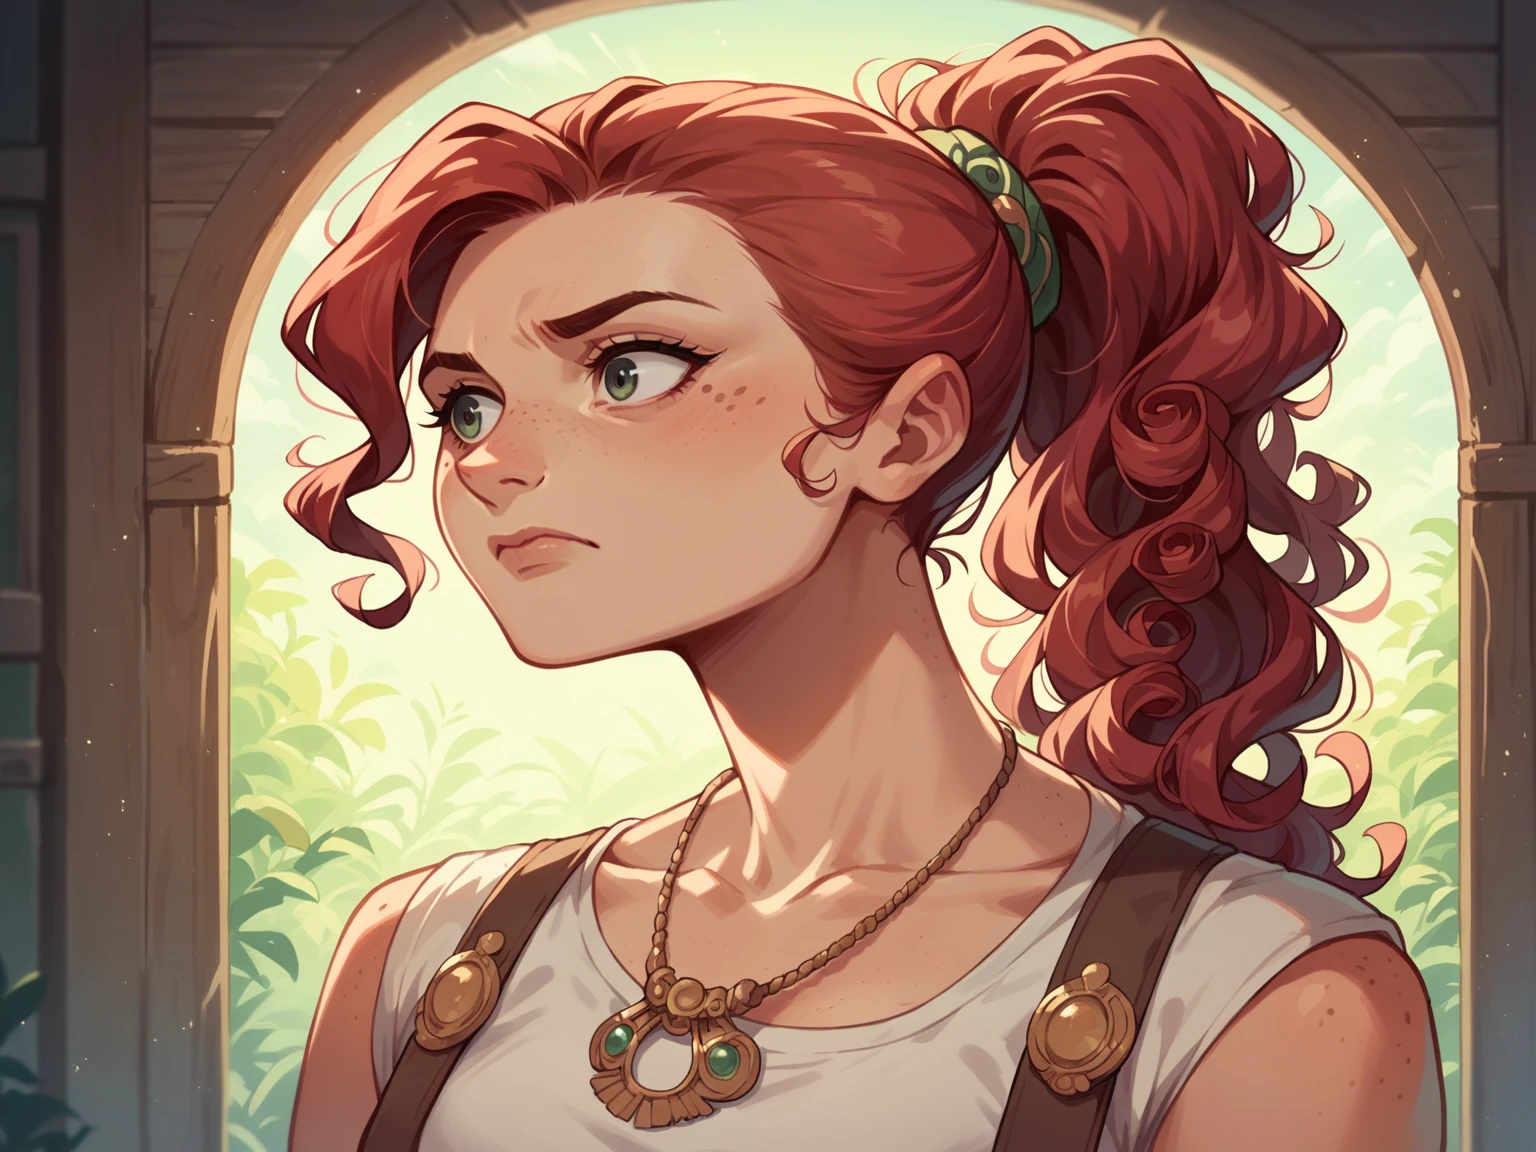 (masterpiece, best quality), 1 Girl, clavicle, curls, Looking at the audience, Vague, Upper Body, necklace, Suspenders, Floral, Ponytail, freckle, Red hair, Sunlight,